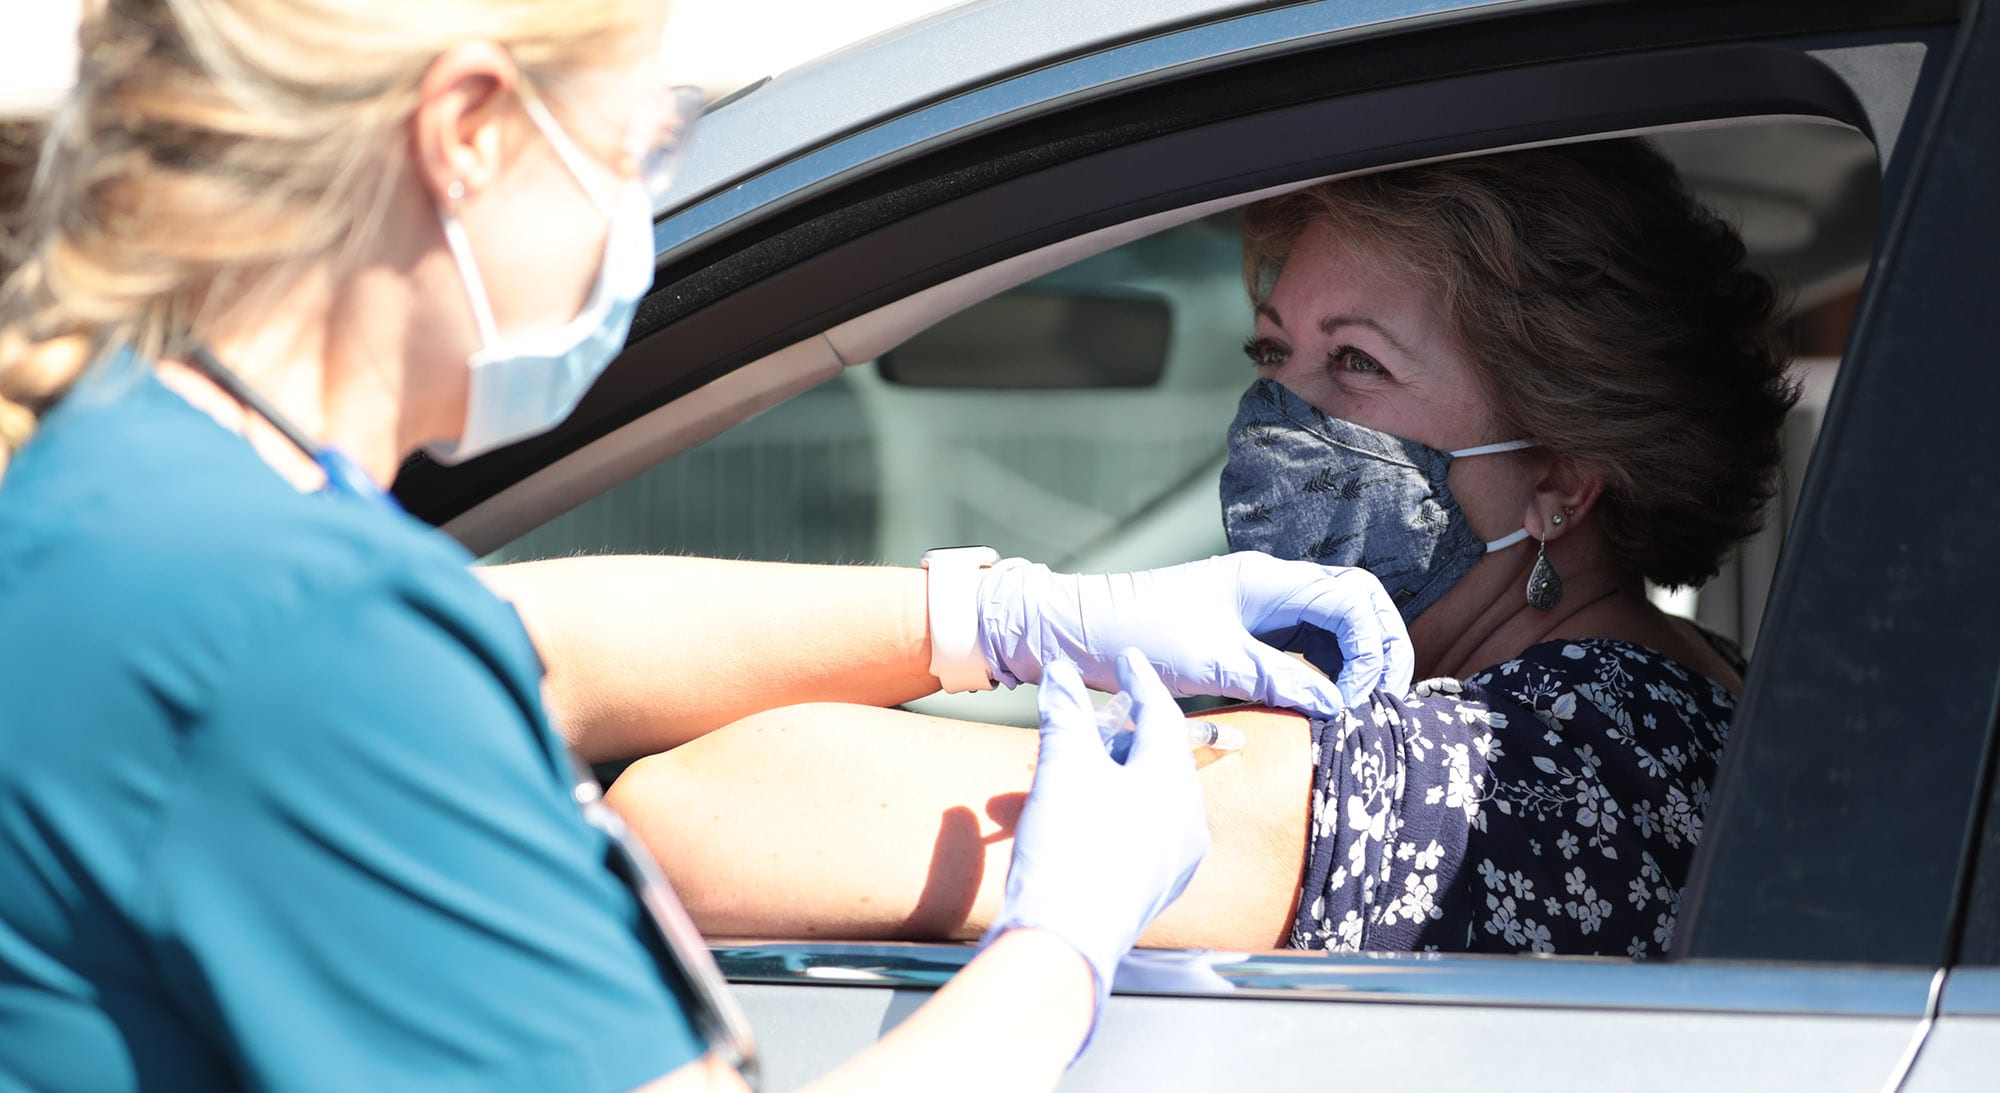 Get Your Flu Shot at One of Our Drive-Through Clinics!